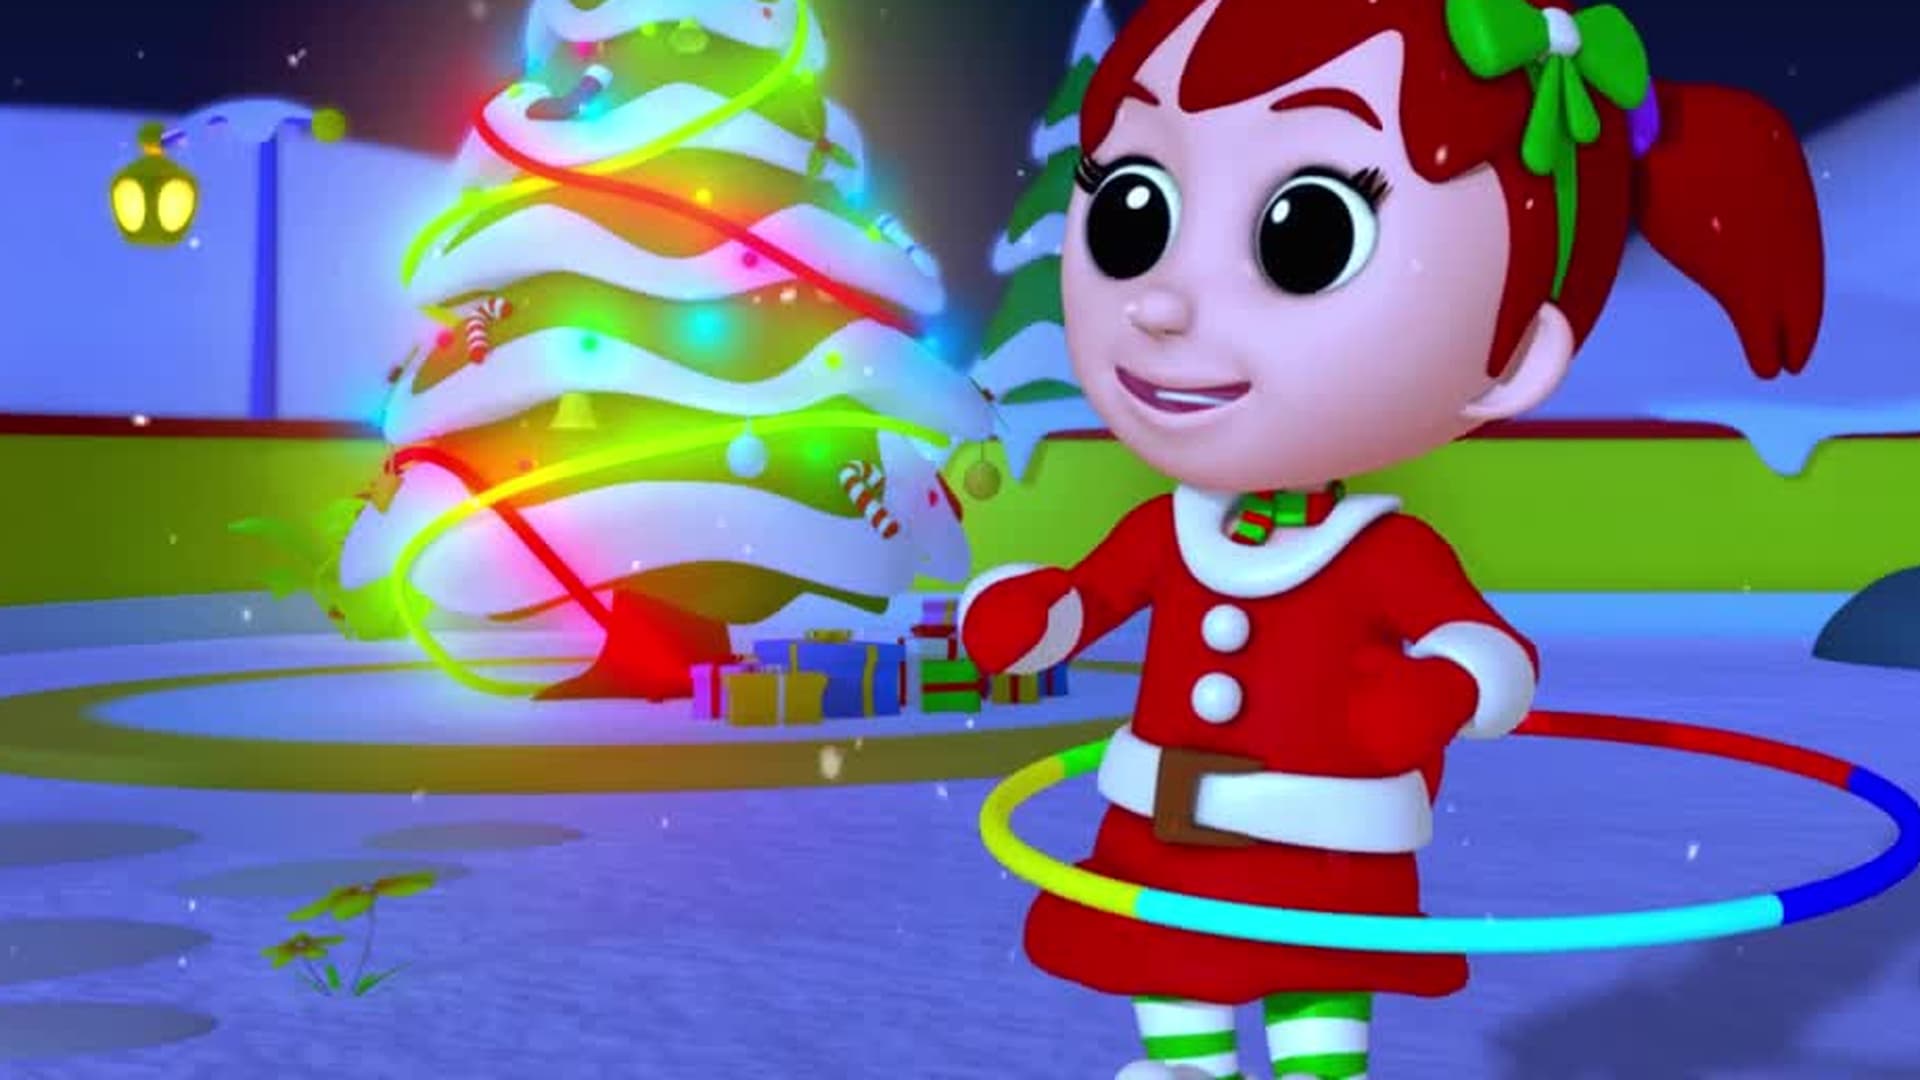 Jingle Bells - Favorite Christmas Song for Toddlers and Kids - Microsoft  Apps